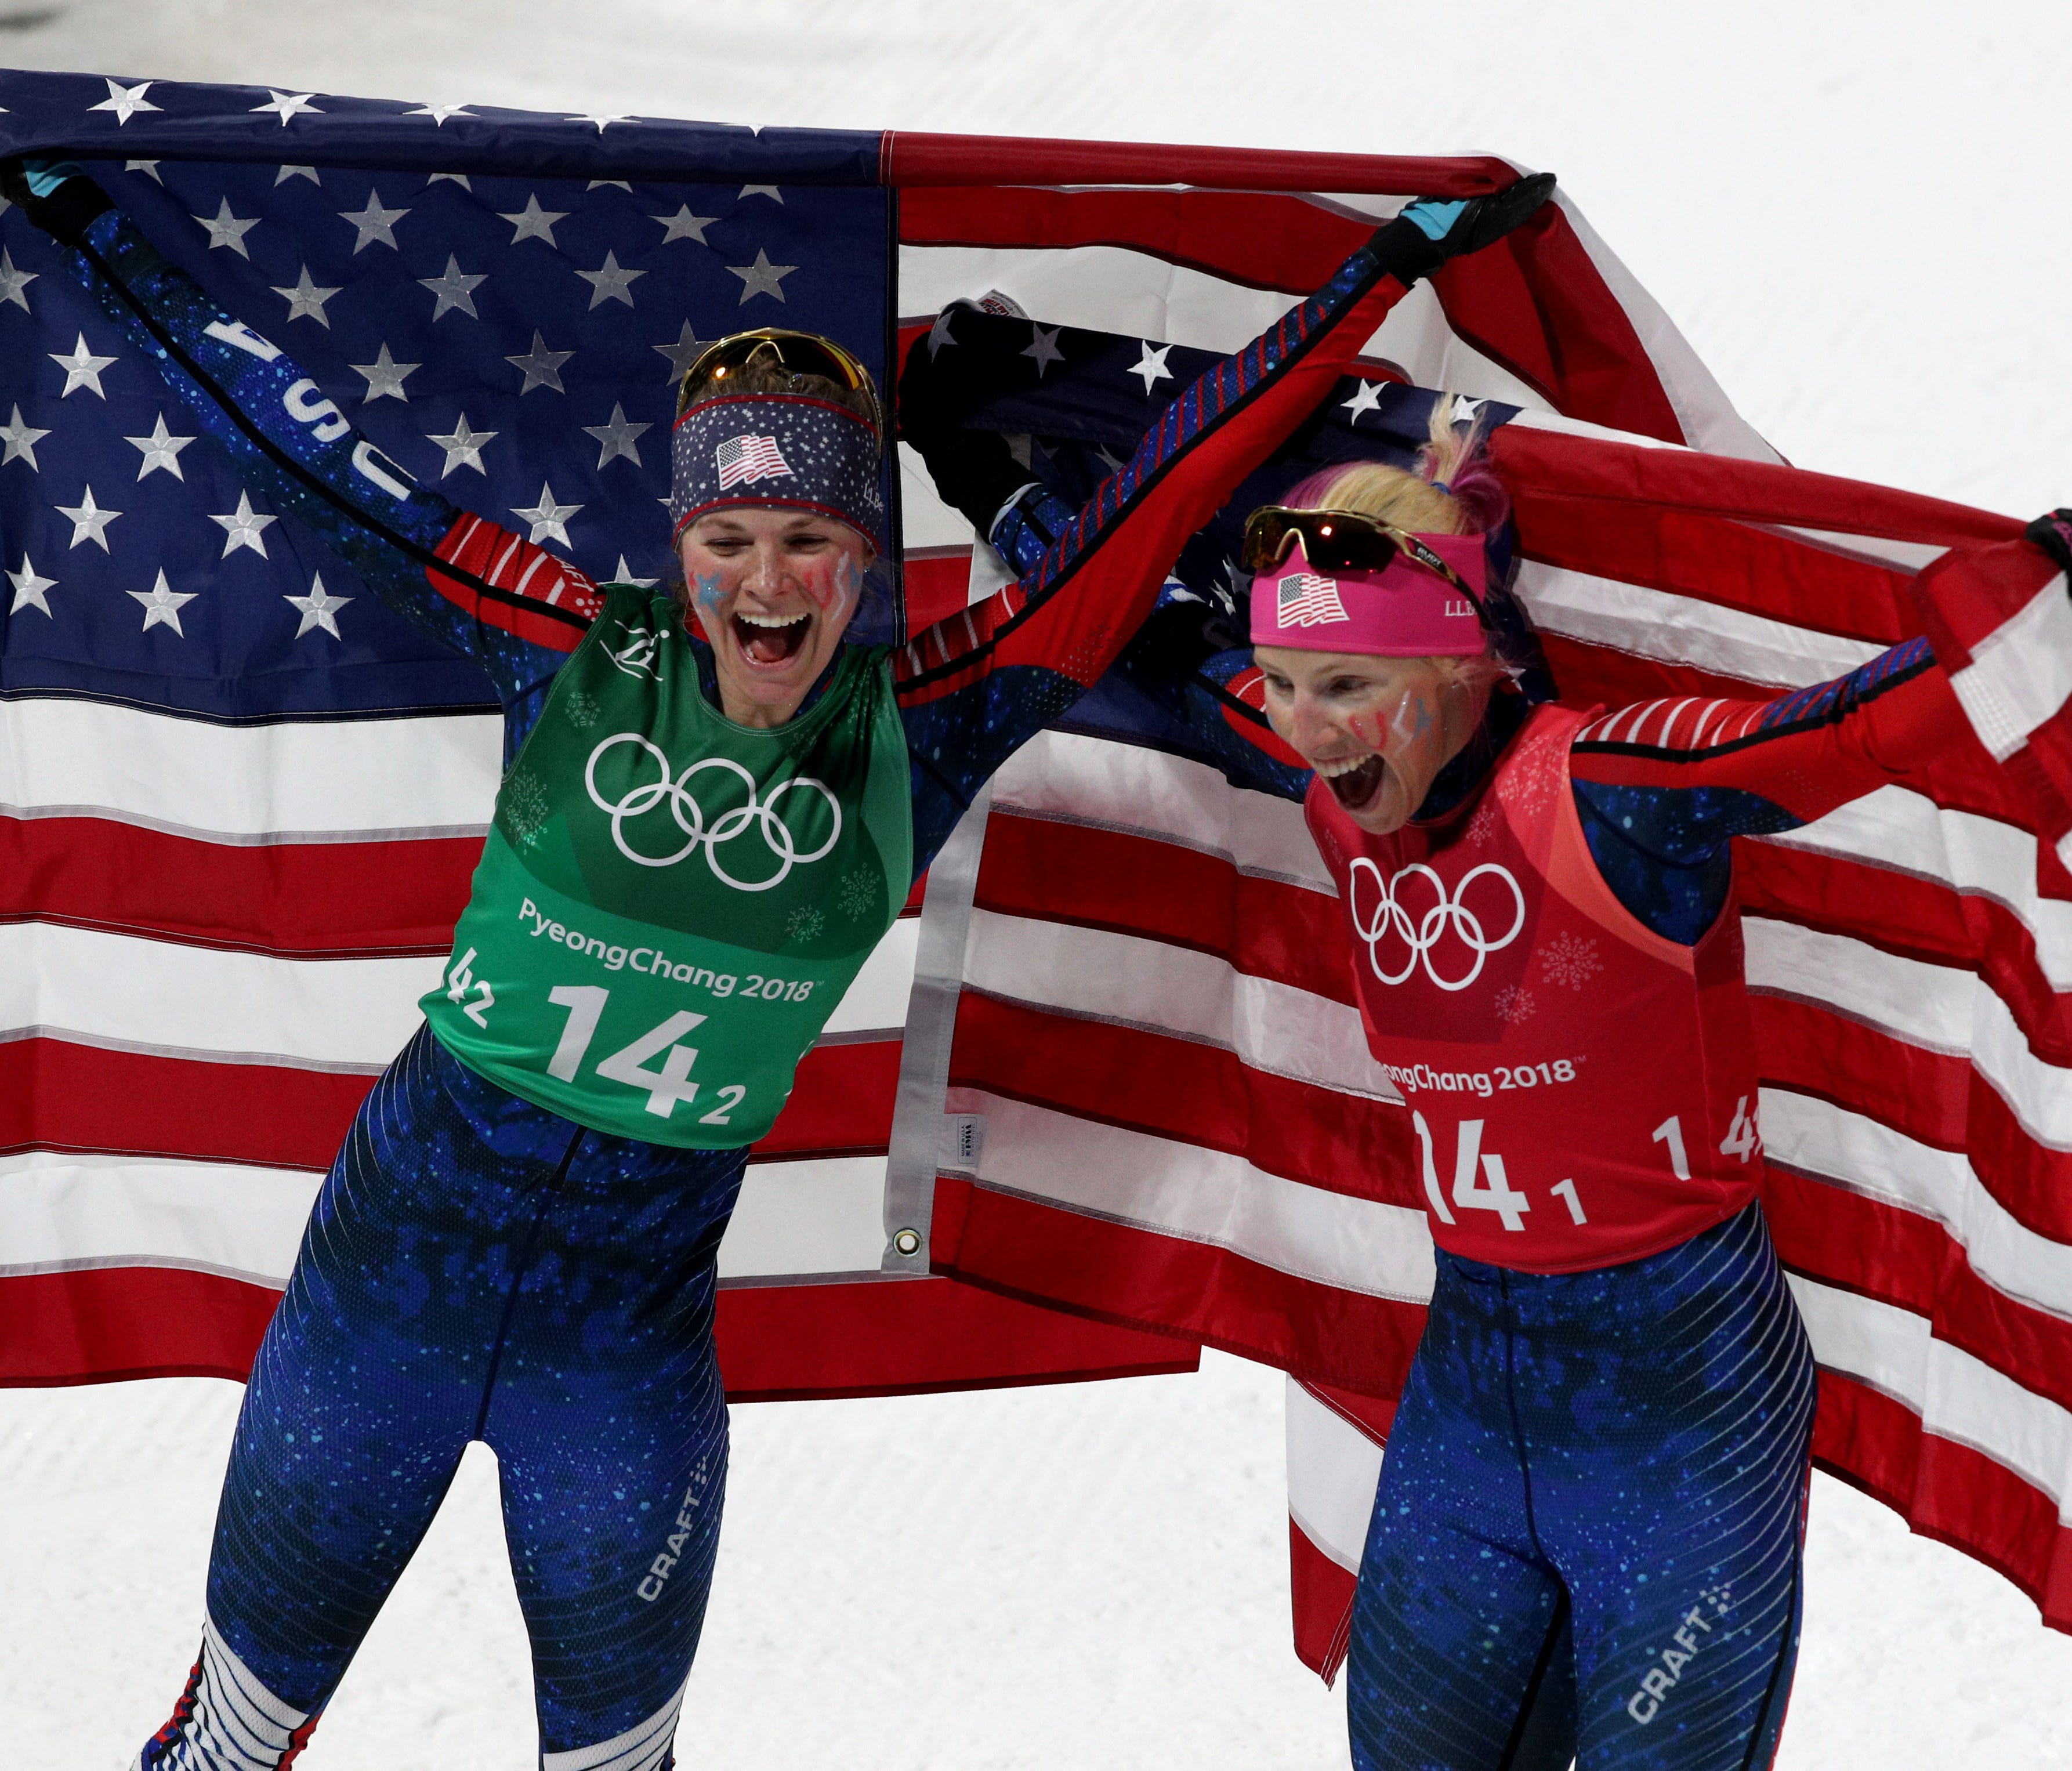 Jessie Diggins (left) and Kikkan Randall  celebrate winning a historic gold medal in the women's cross-country skiing team sprint freestyle final during the Pyeongchang 2018 Olympic Winter Games at Alpensia Cross-Country Centre on Feb. 21.